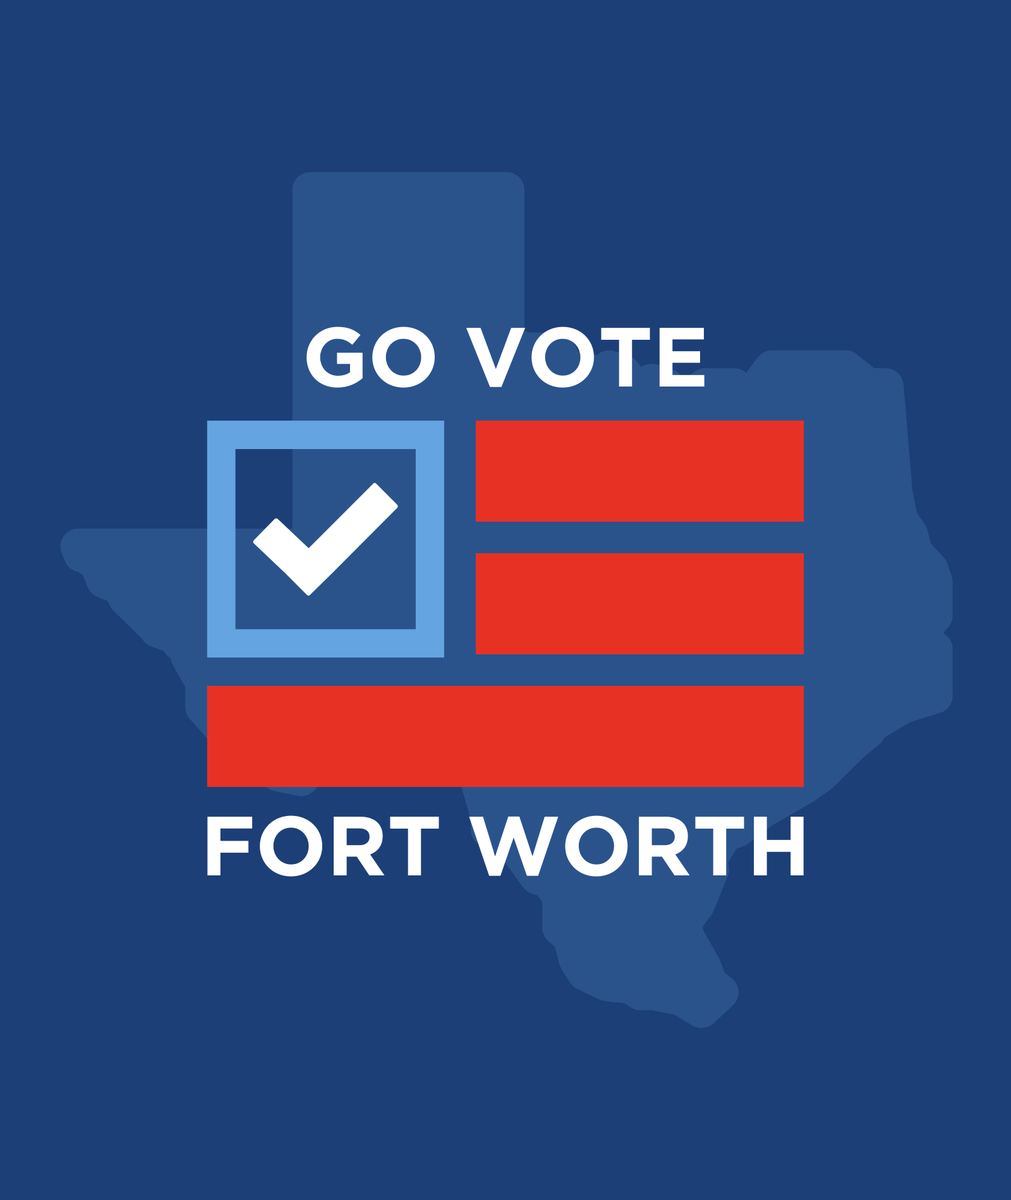 🚨 Early Voting Begins Today! 🚨 Fort Worth, it’s time to shape our future. Vote early from April 22-30! Check out the link for voting locations. Let’s make our voices heard! 🗳️ tarrantcountytx.gov/en/elections.h… #FortWorthVotes